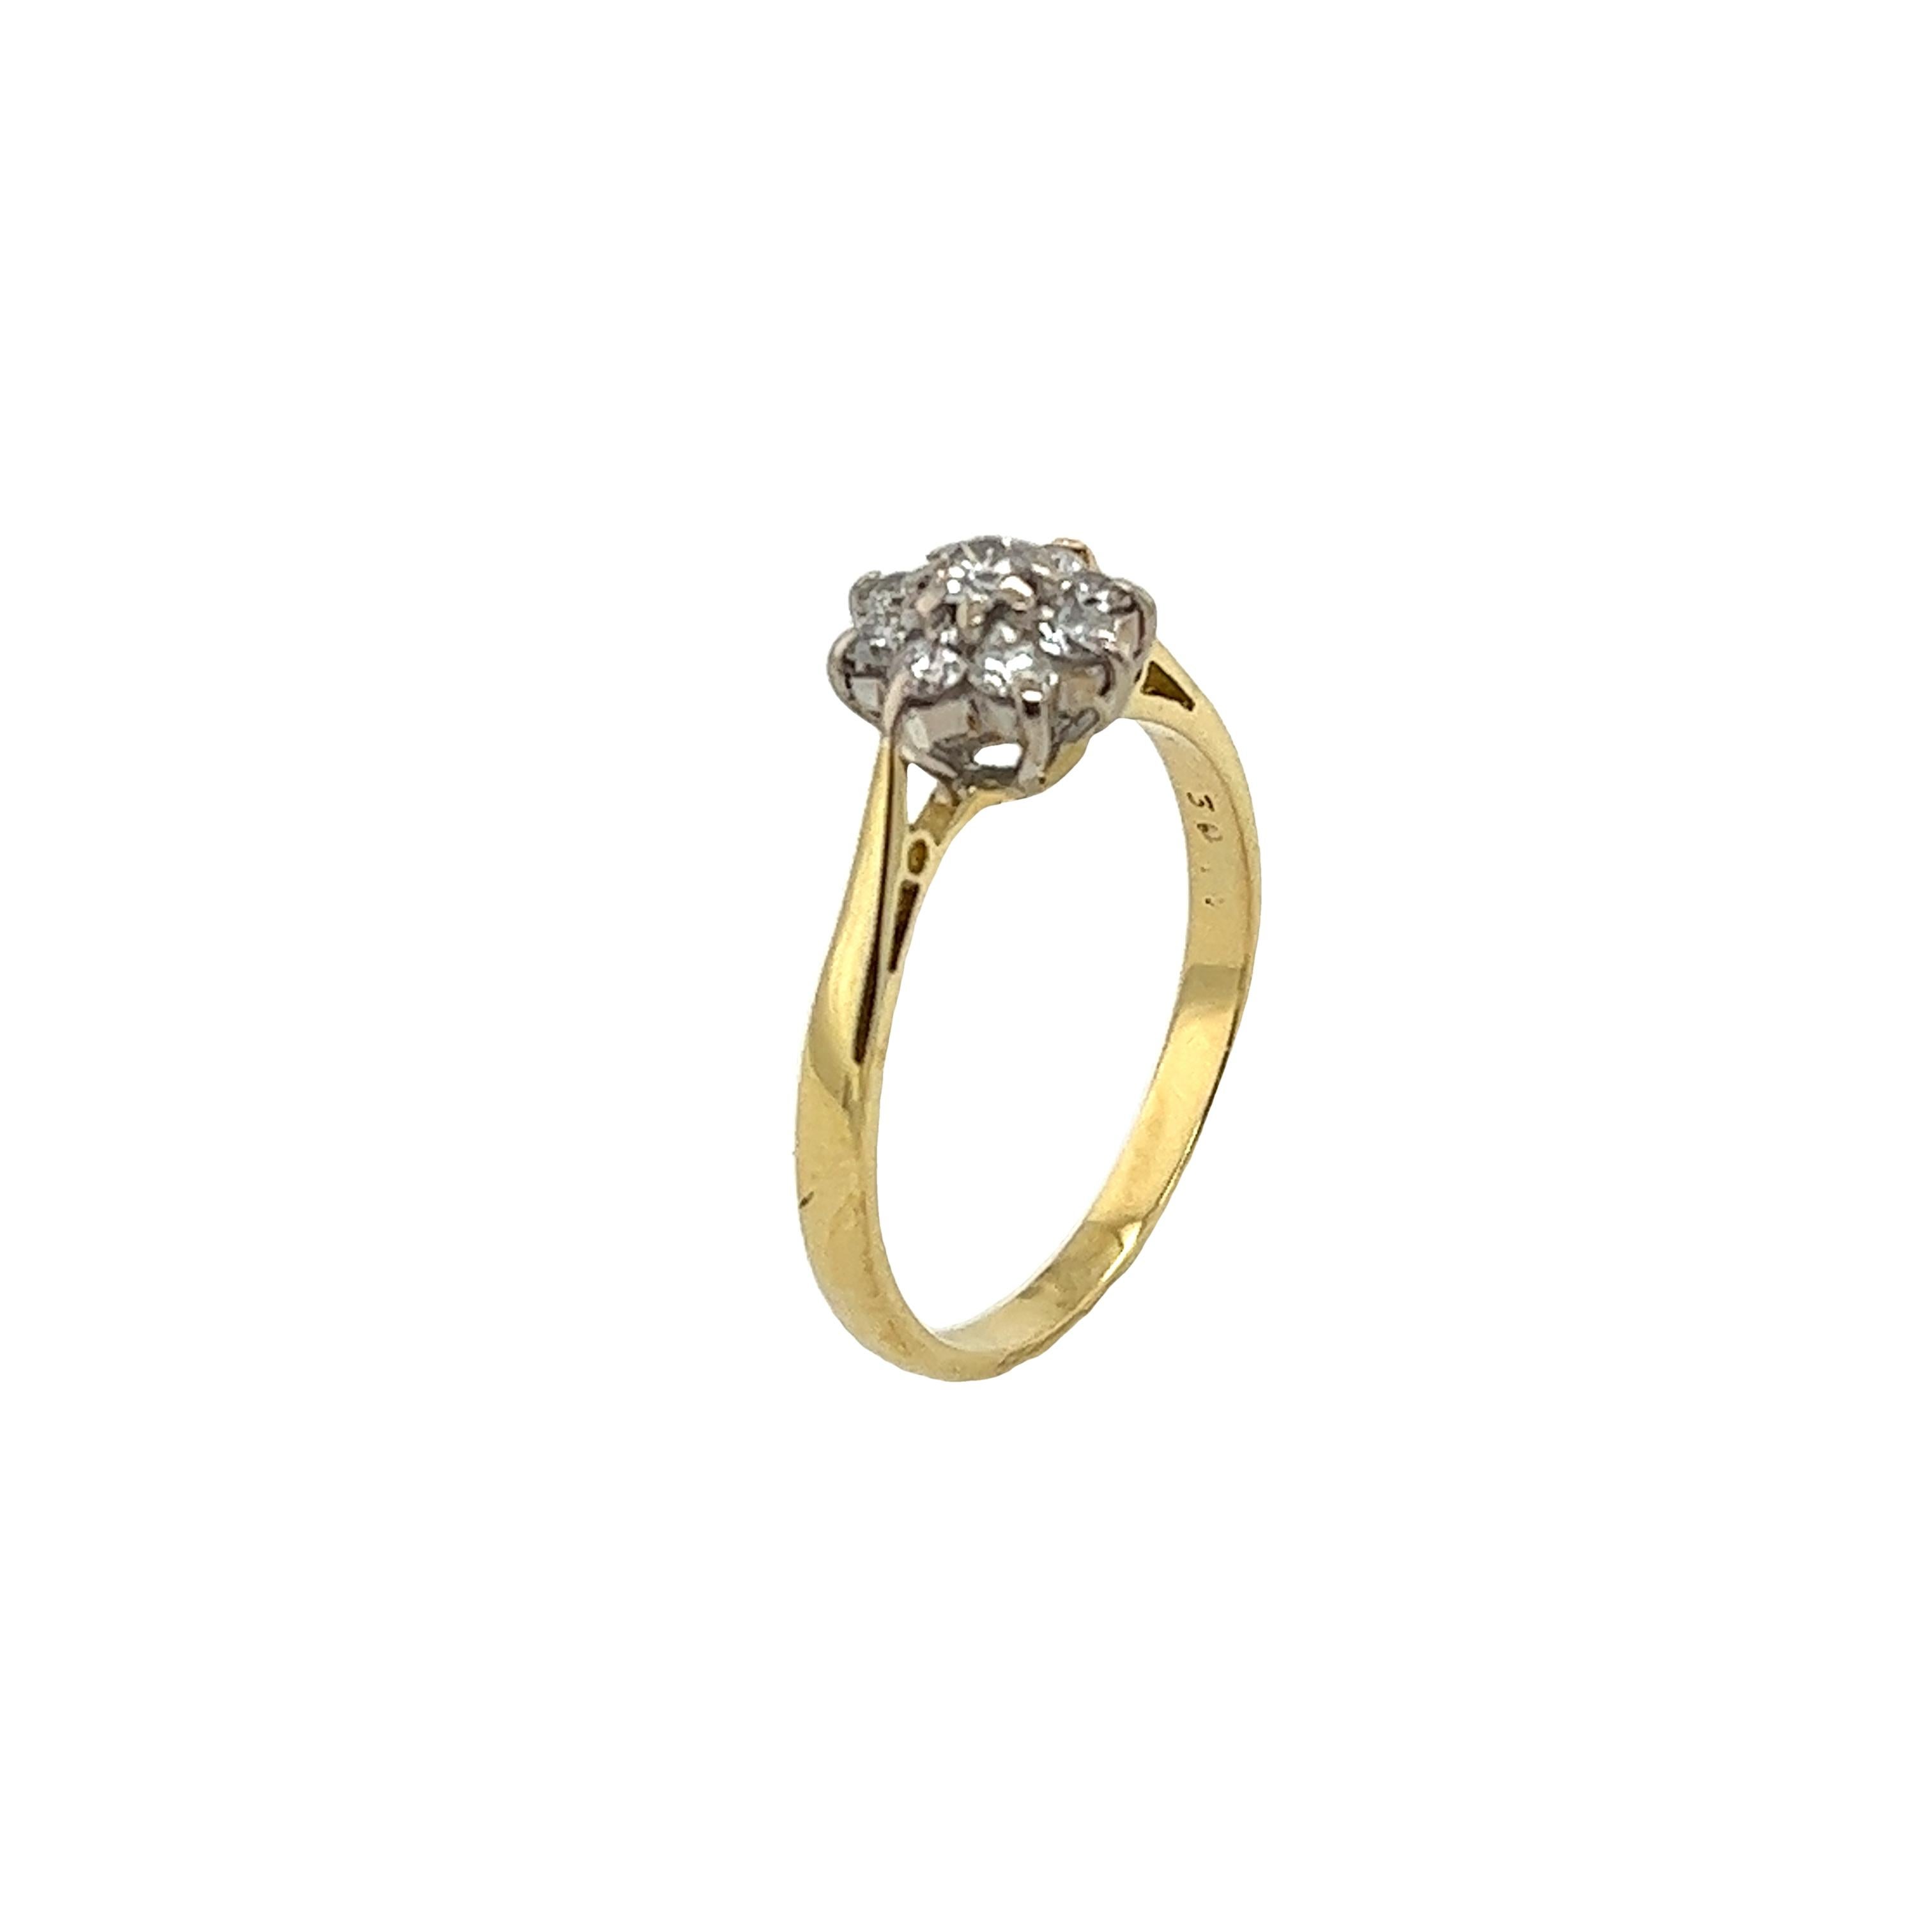 Round Cut 18ct Yellow & White Gold Diamond Cluster Ring, Set With 2.25ct Round Diamonds For Sale